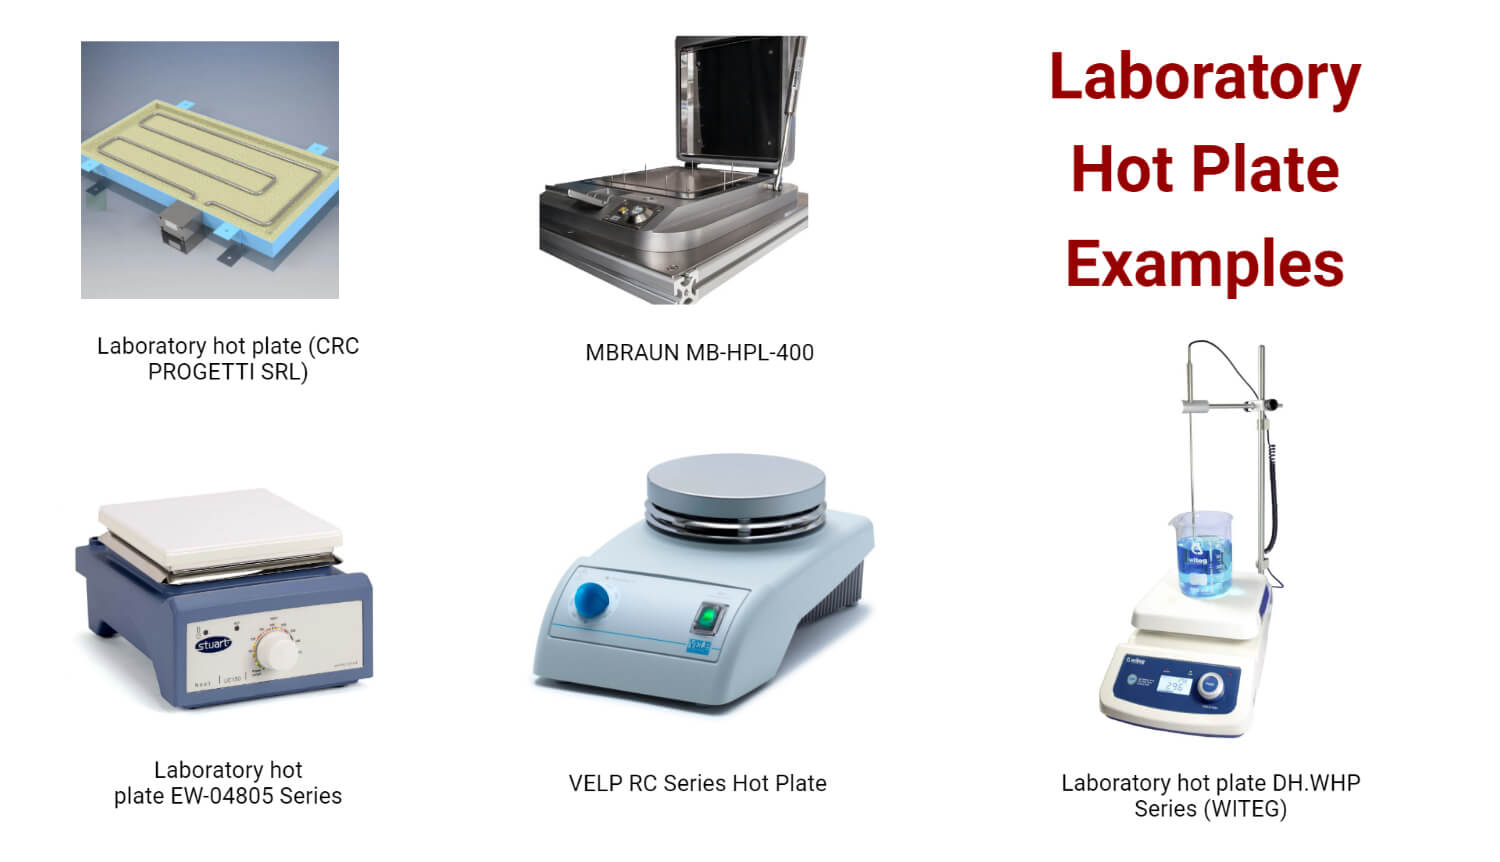 Examples of Laboratory Hot Plate